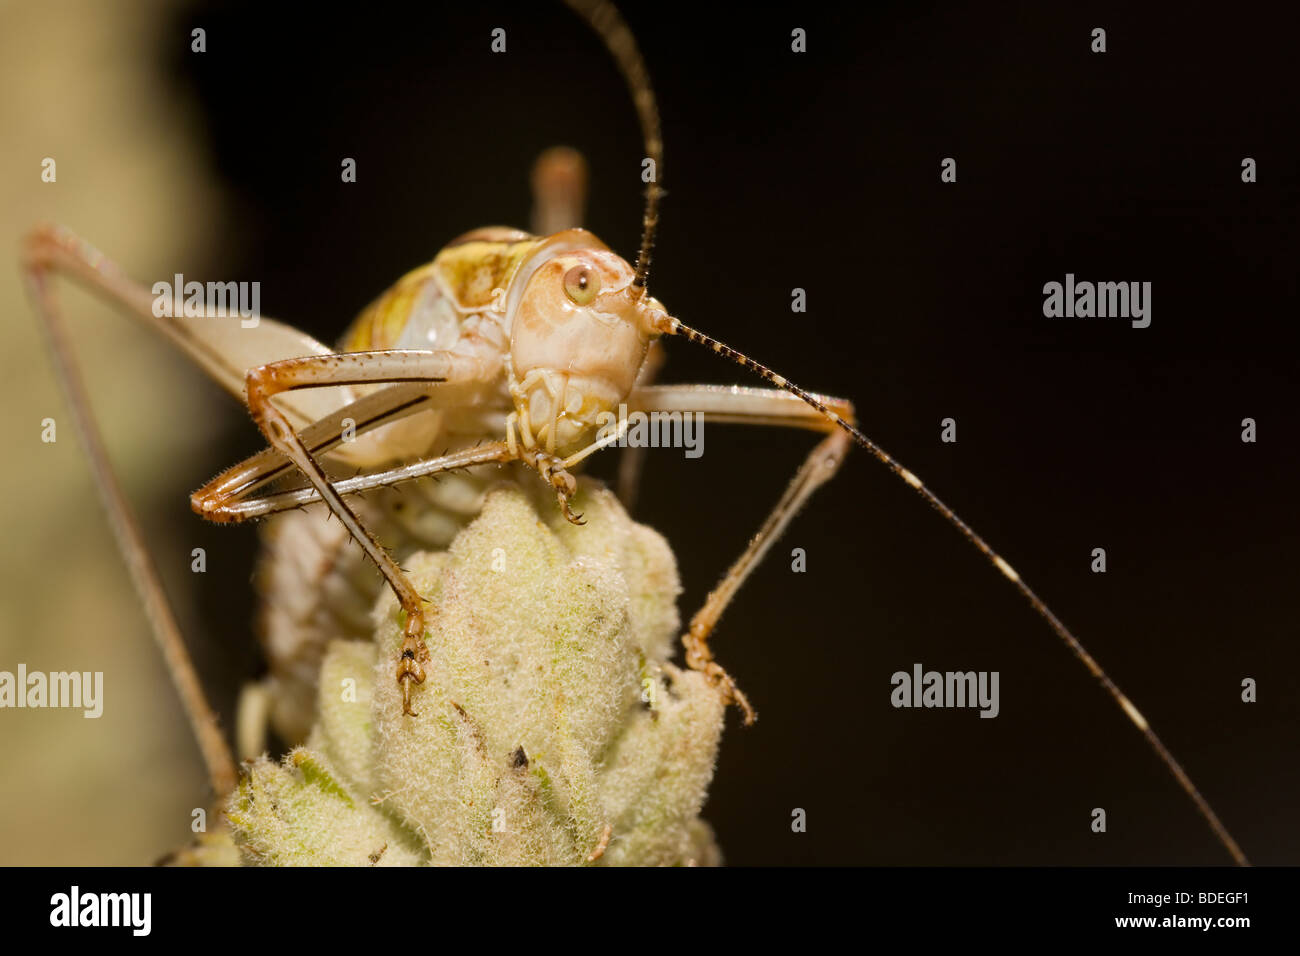 Bush Cricket cleaning a foot with its mouthparts Stock Photo